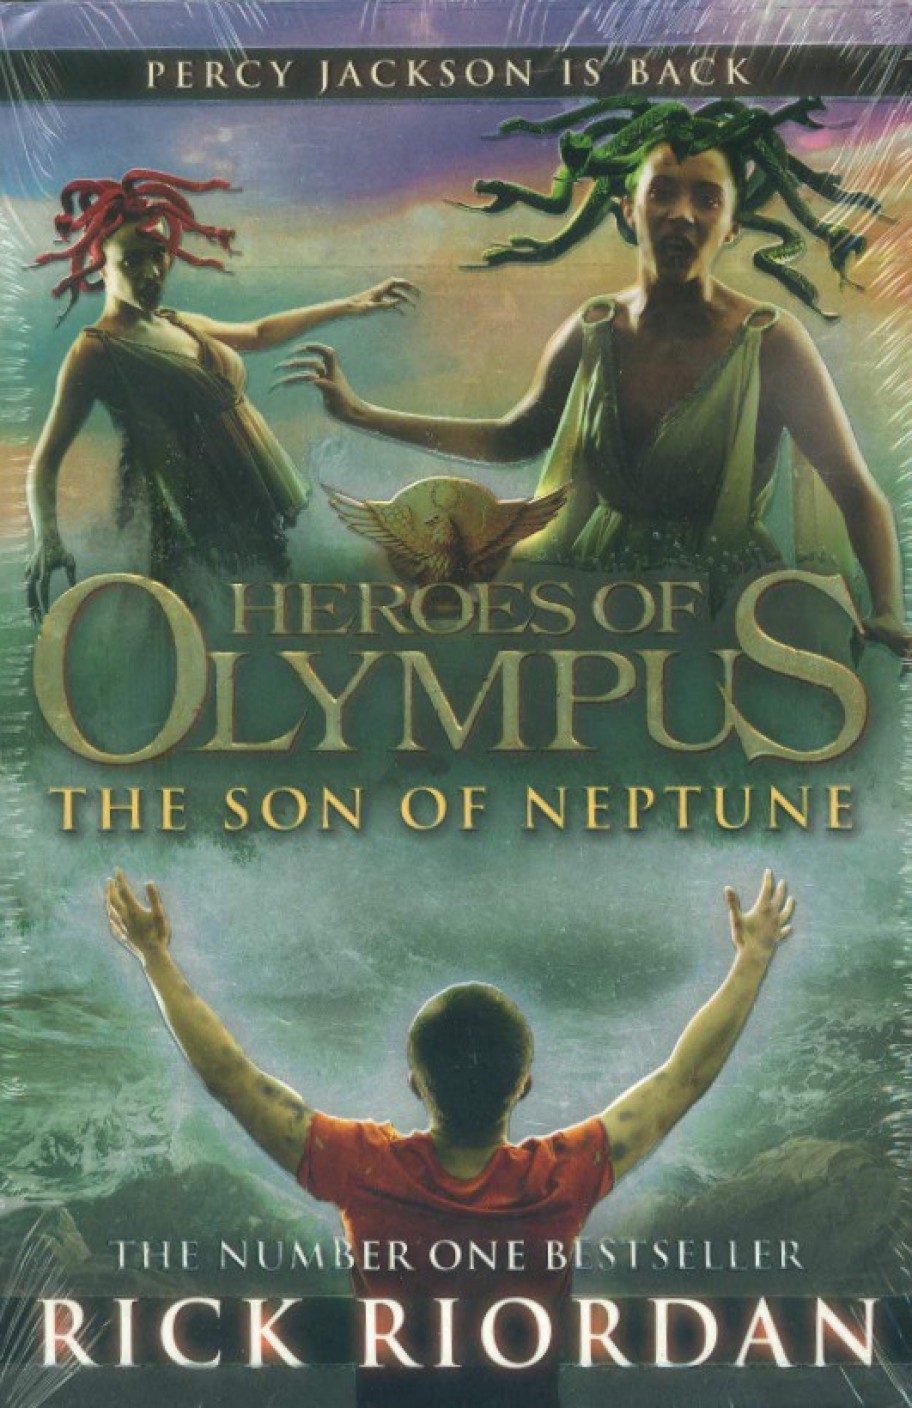 the son of neptune review